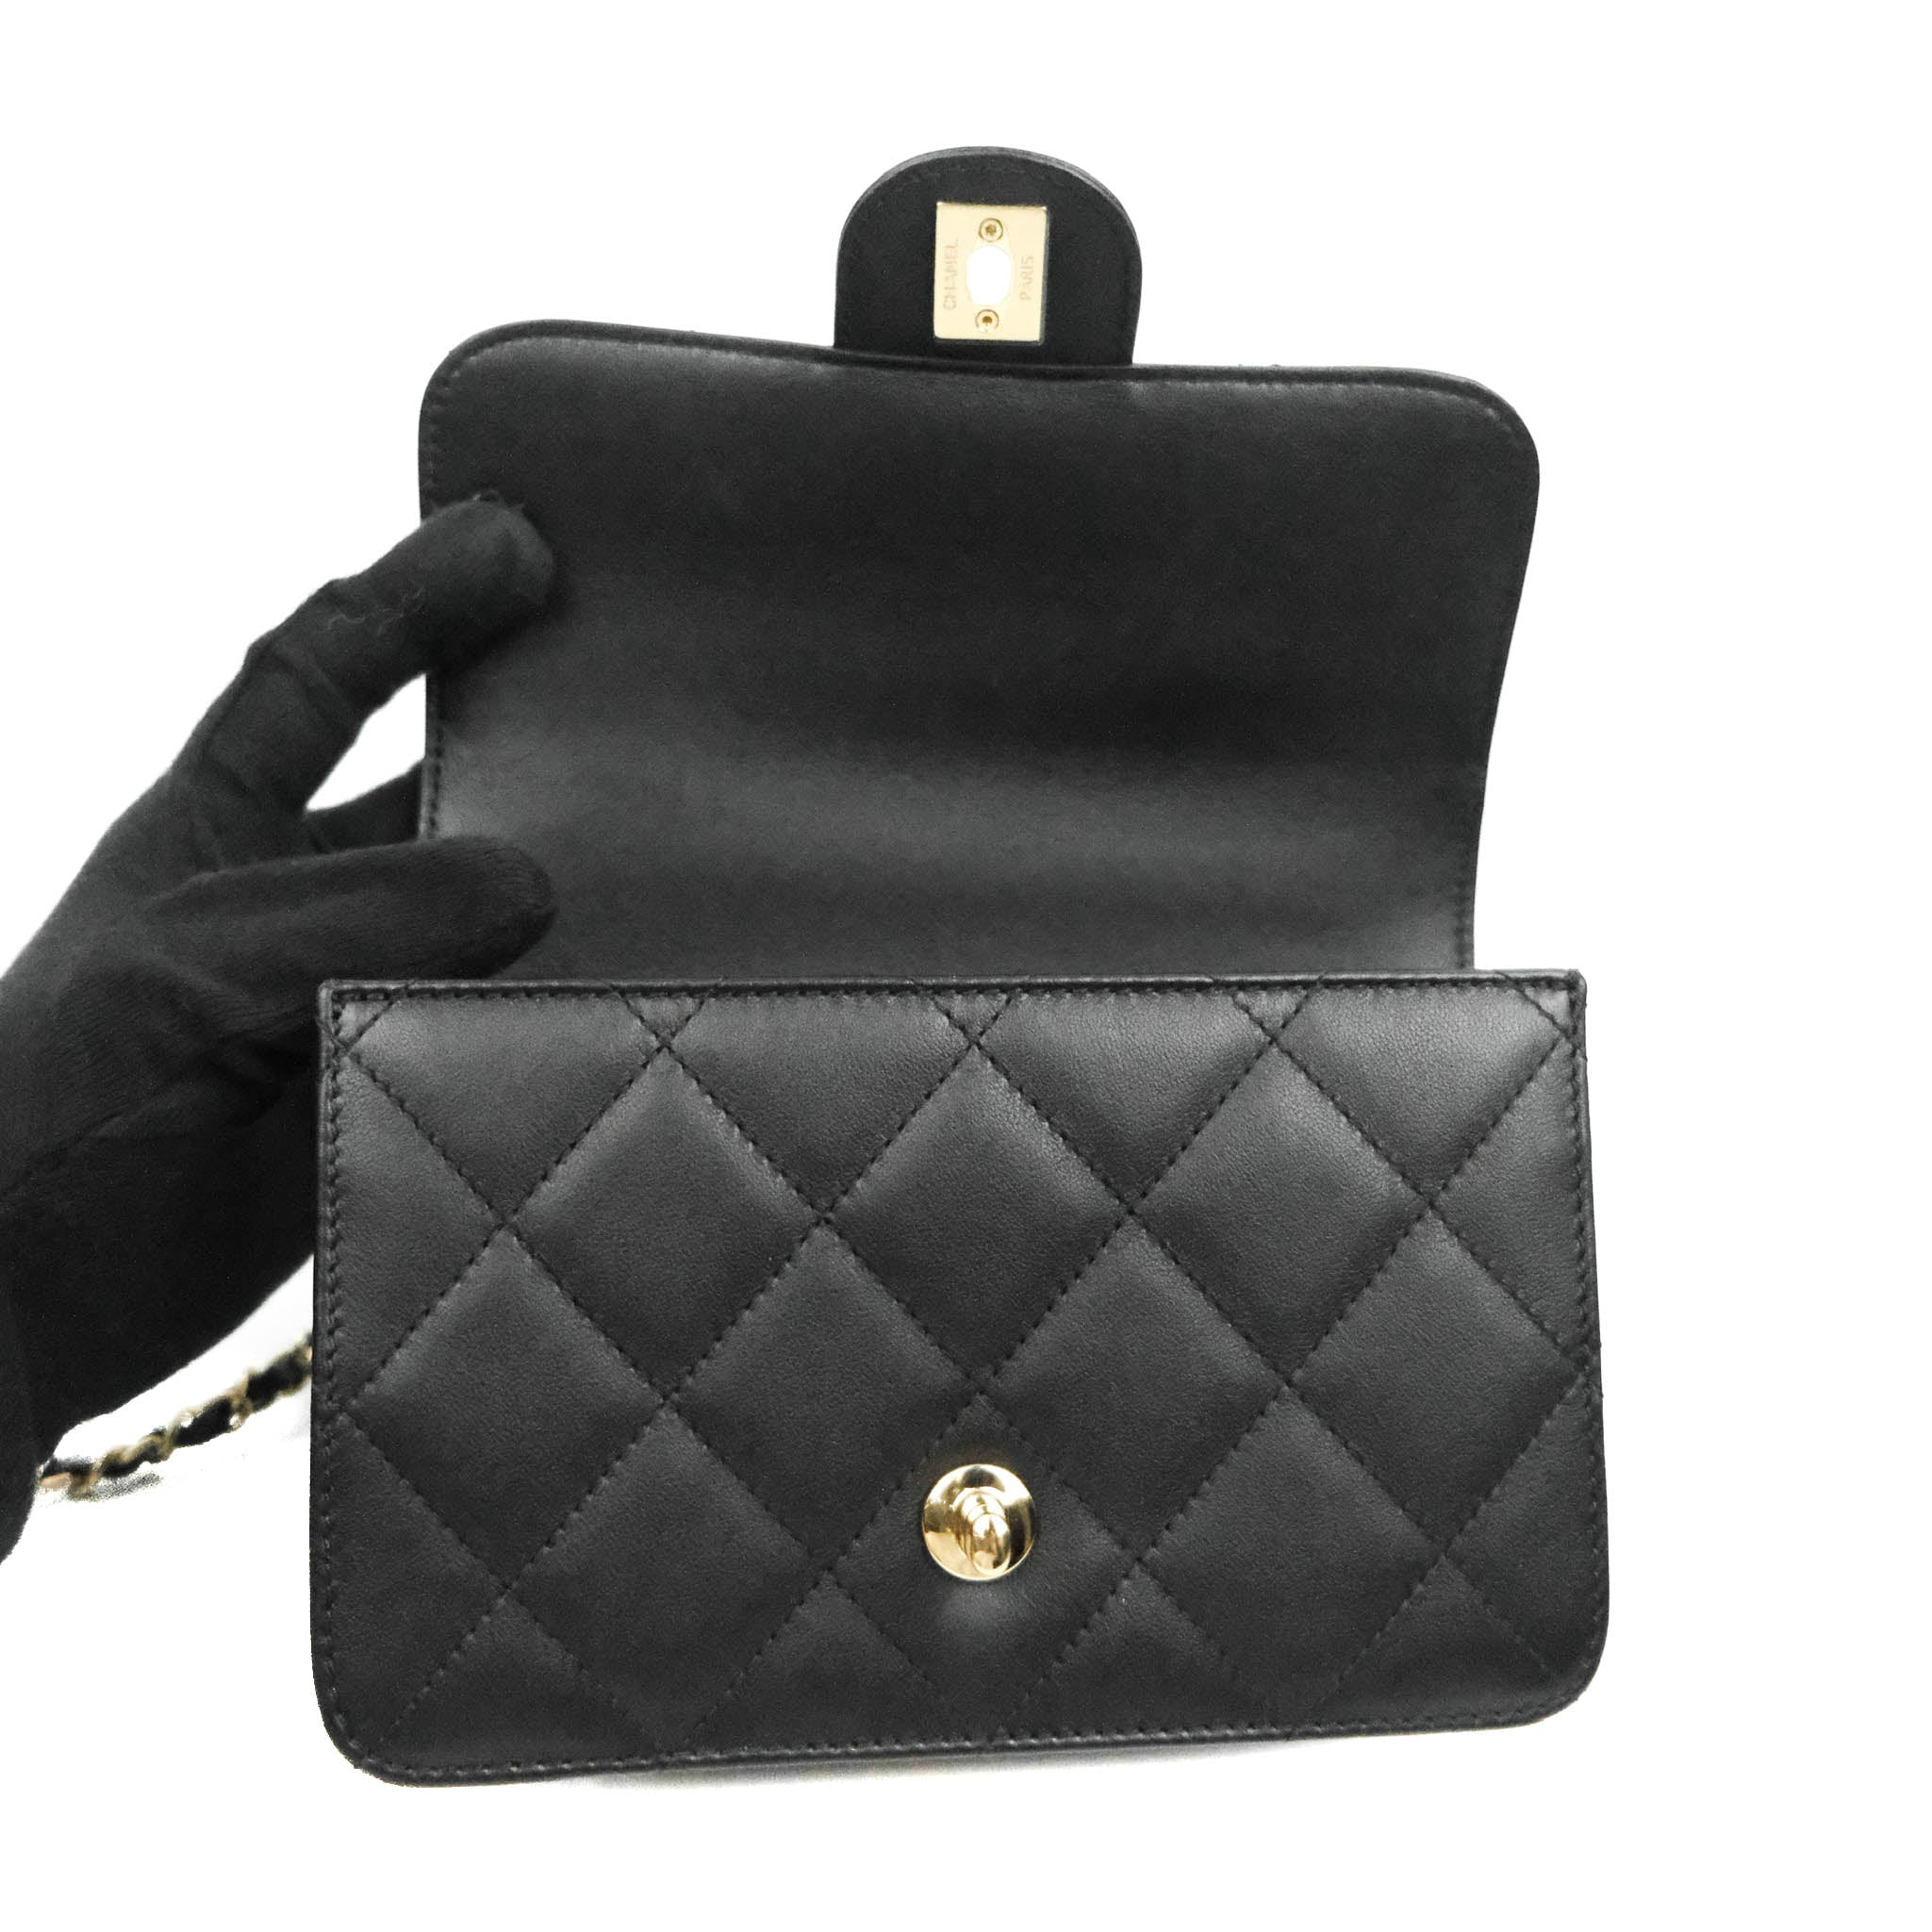 Chanel Vintage Black Quilted Leather Mini Square Classic Flap Bag   STYLISHTOP